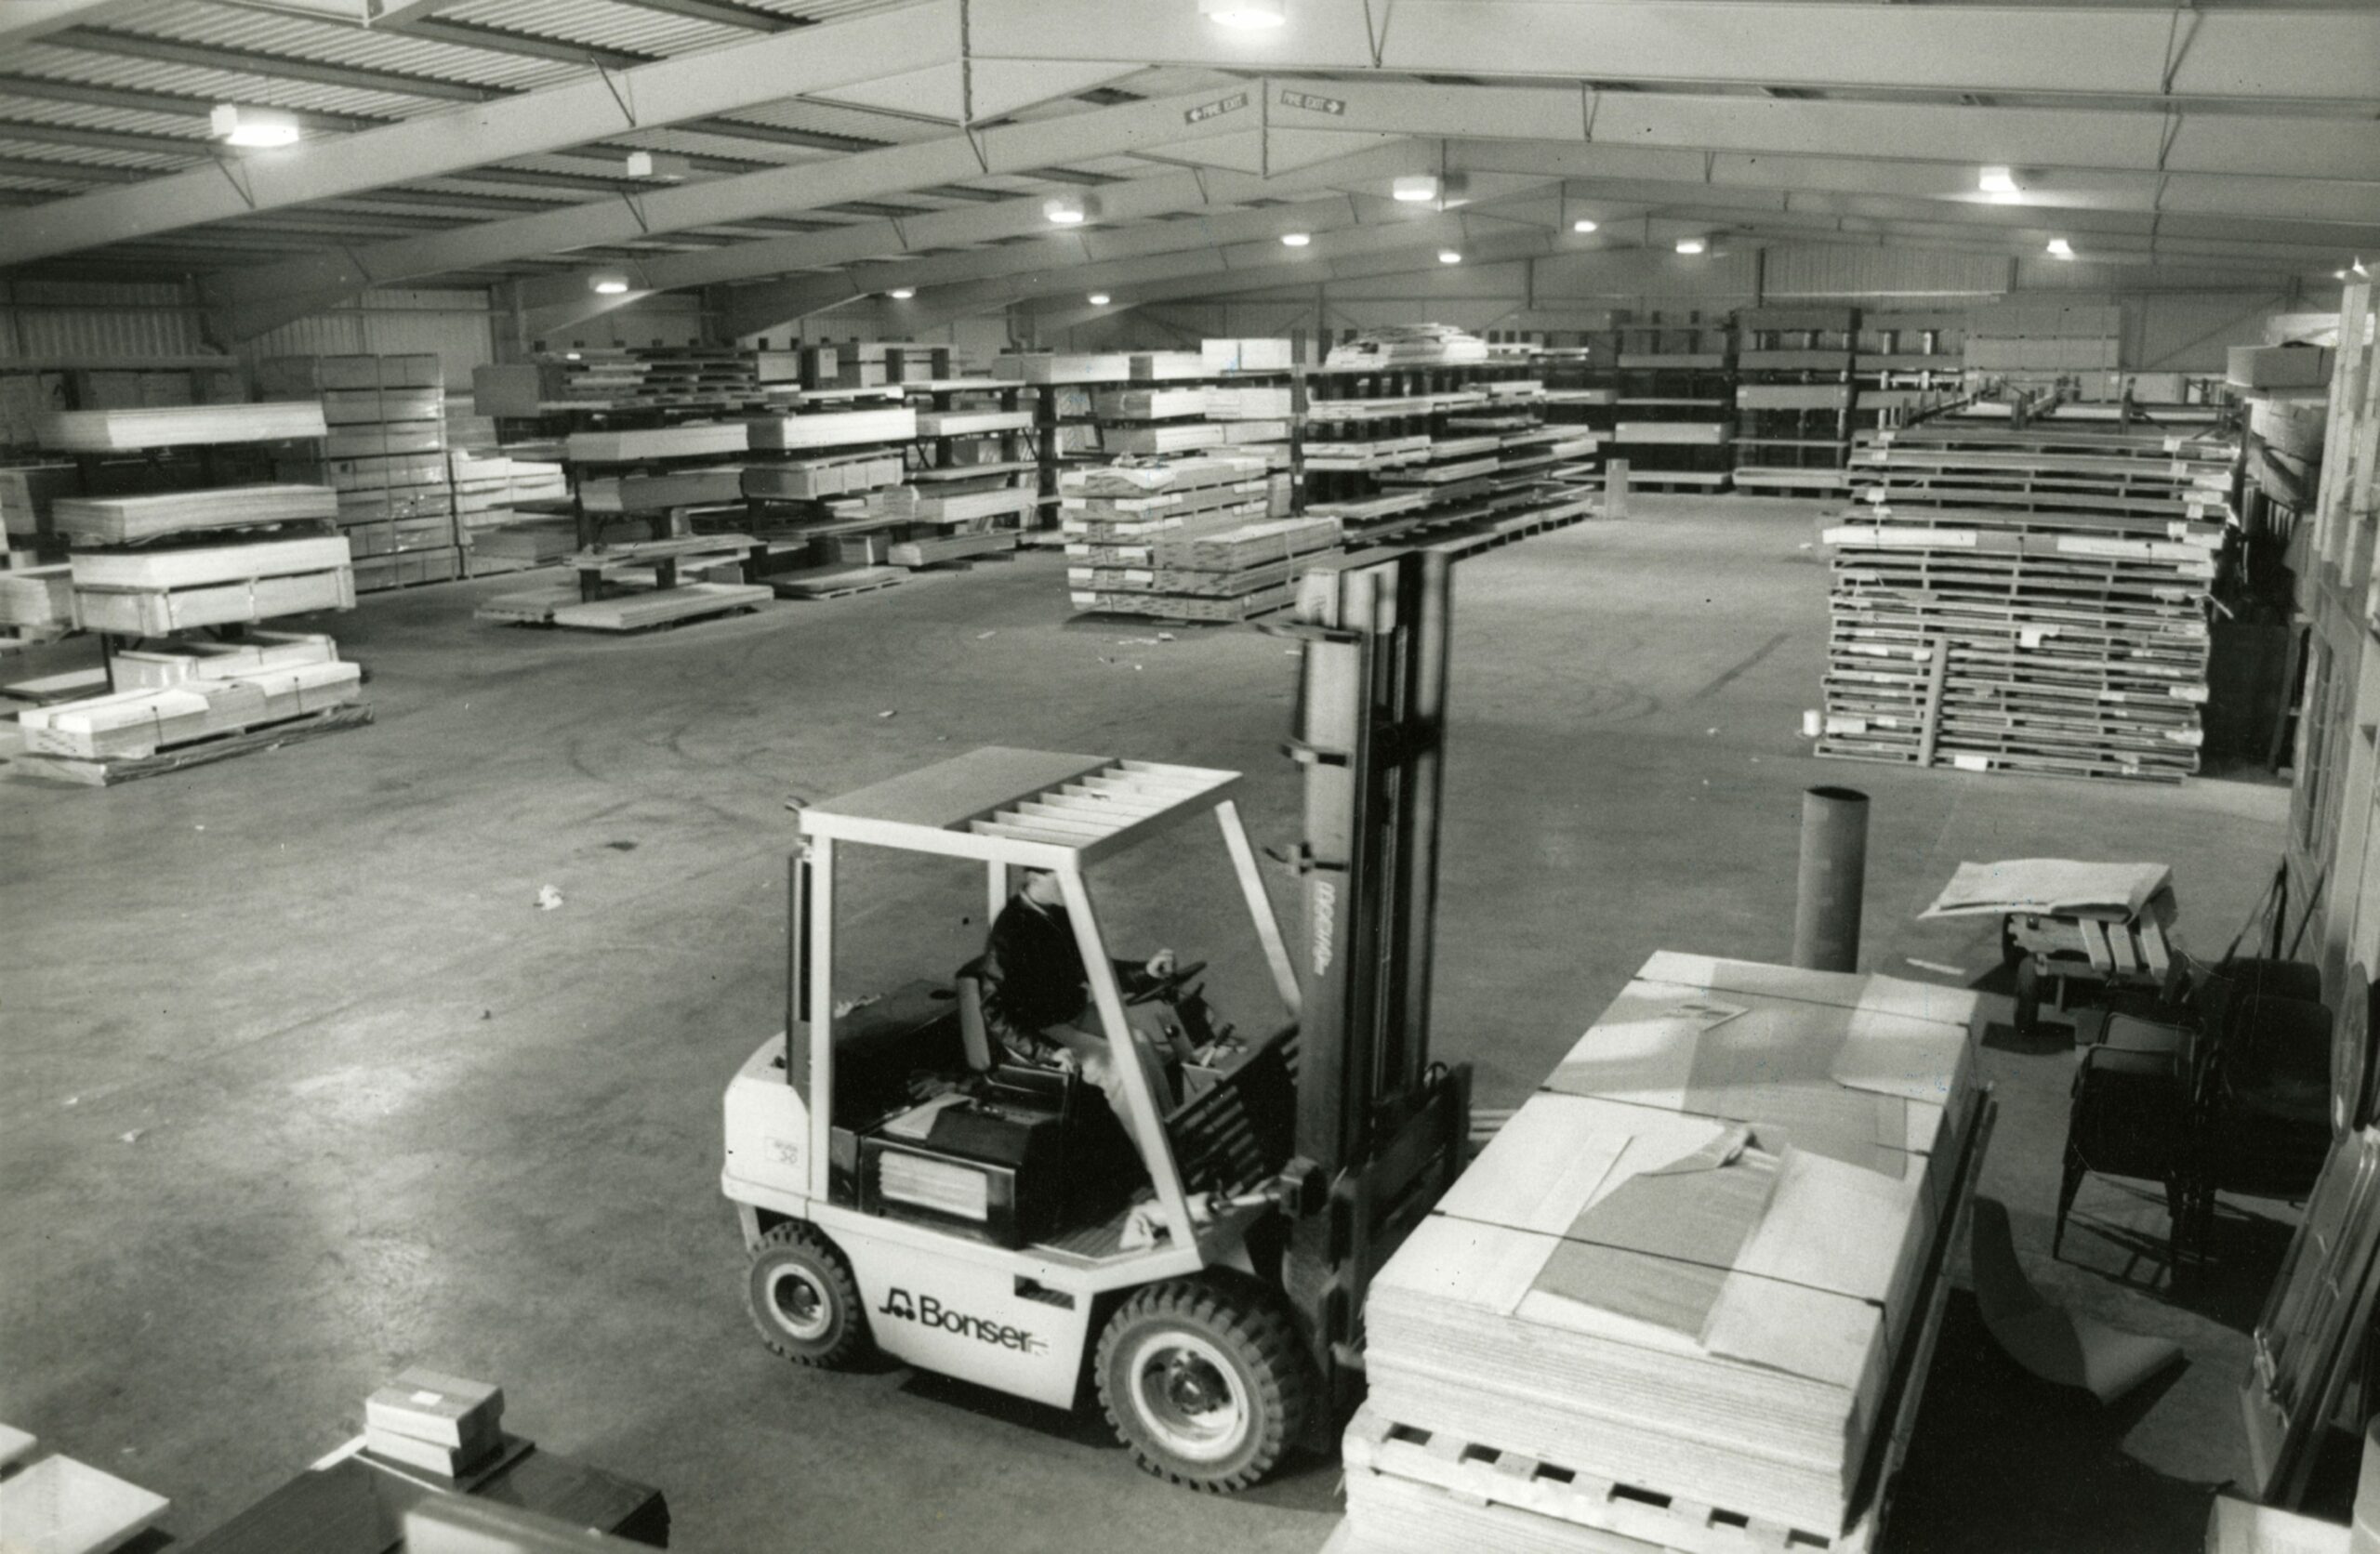 A staff member moving materials in the warehouse. Image: DC Thomson.